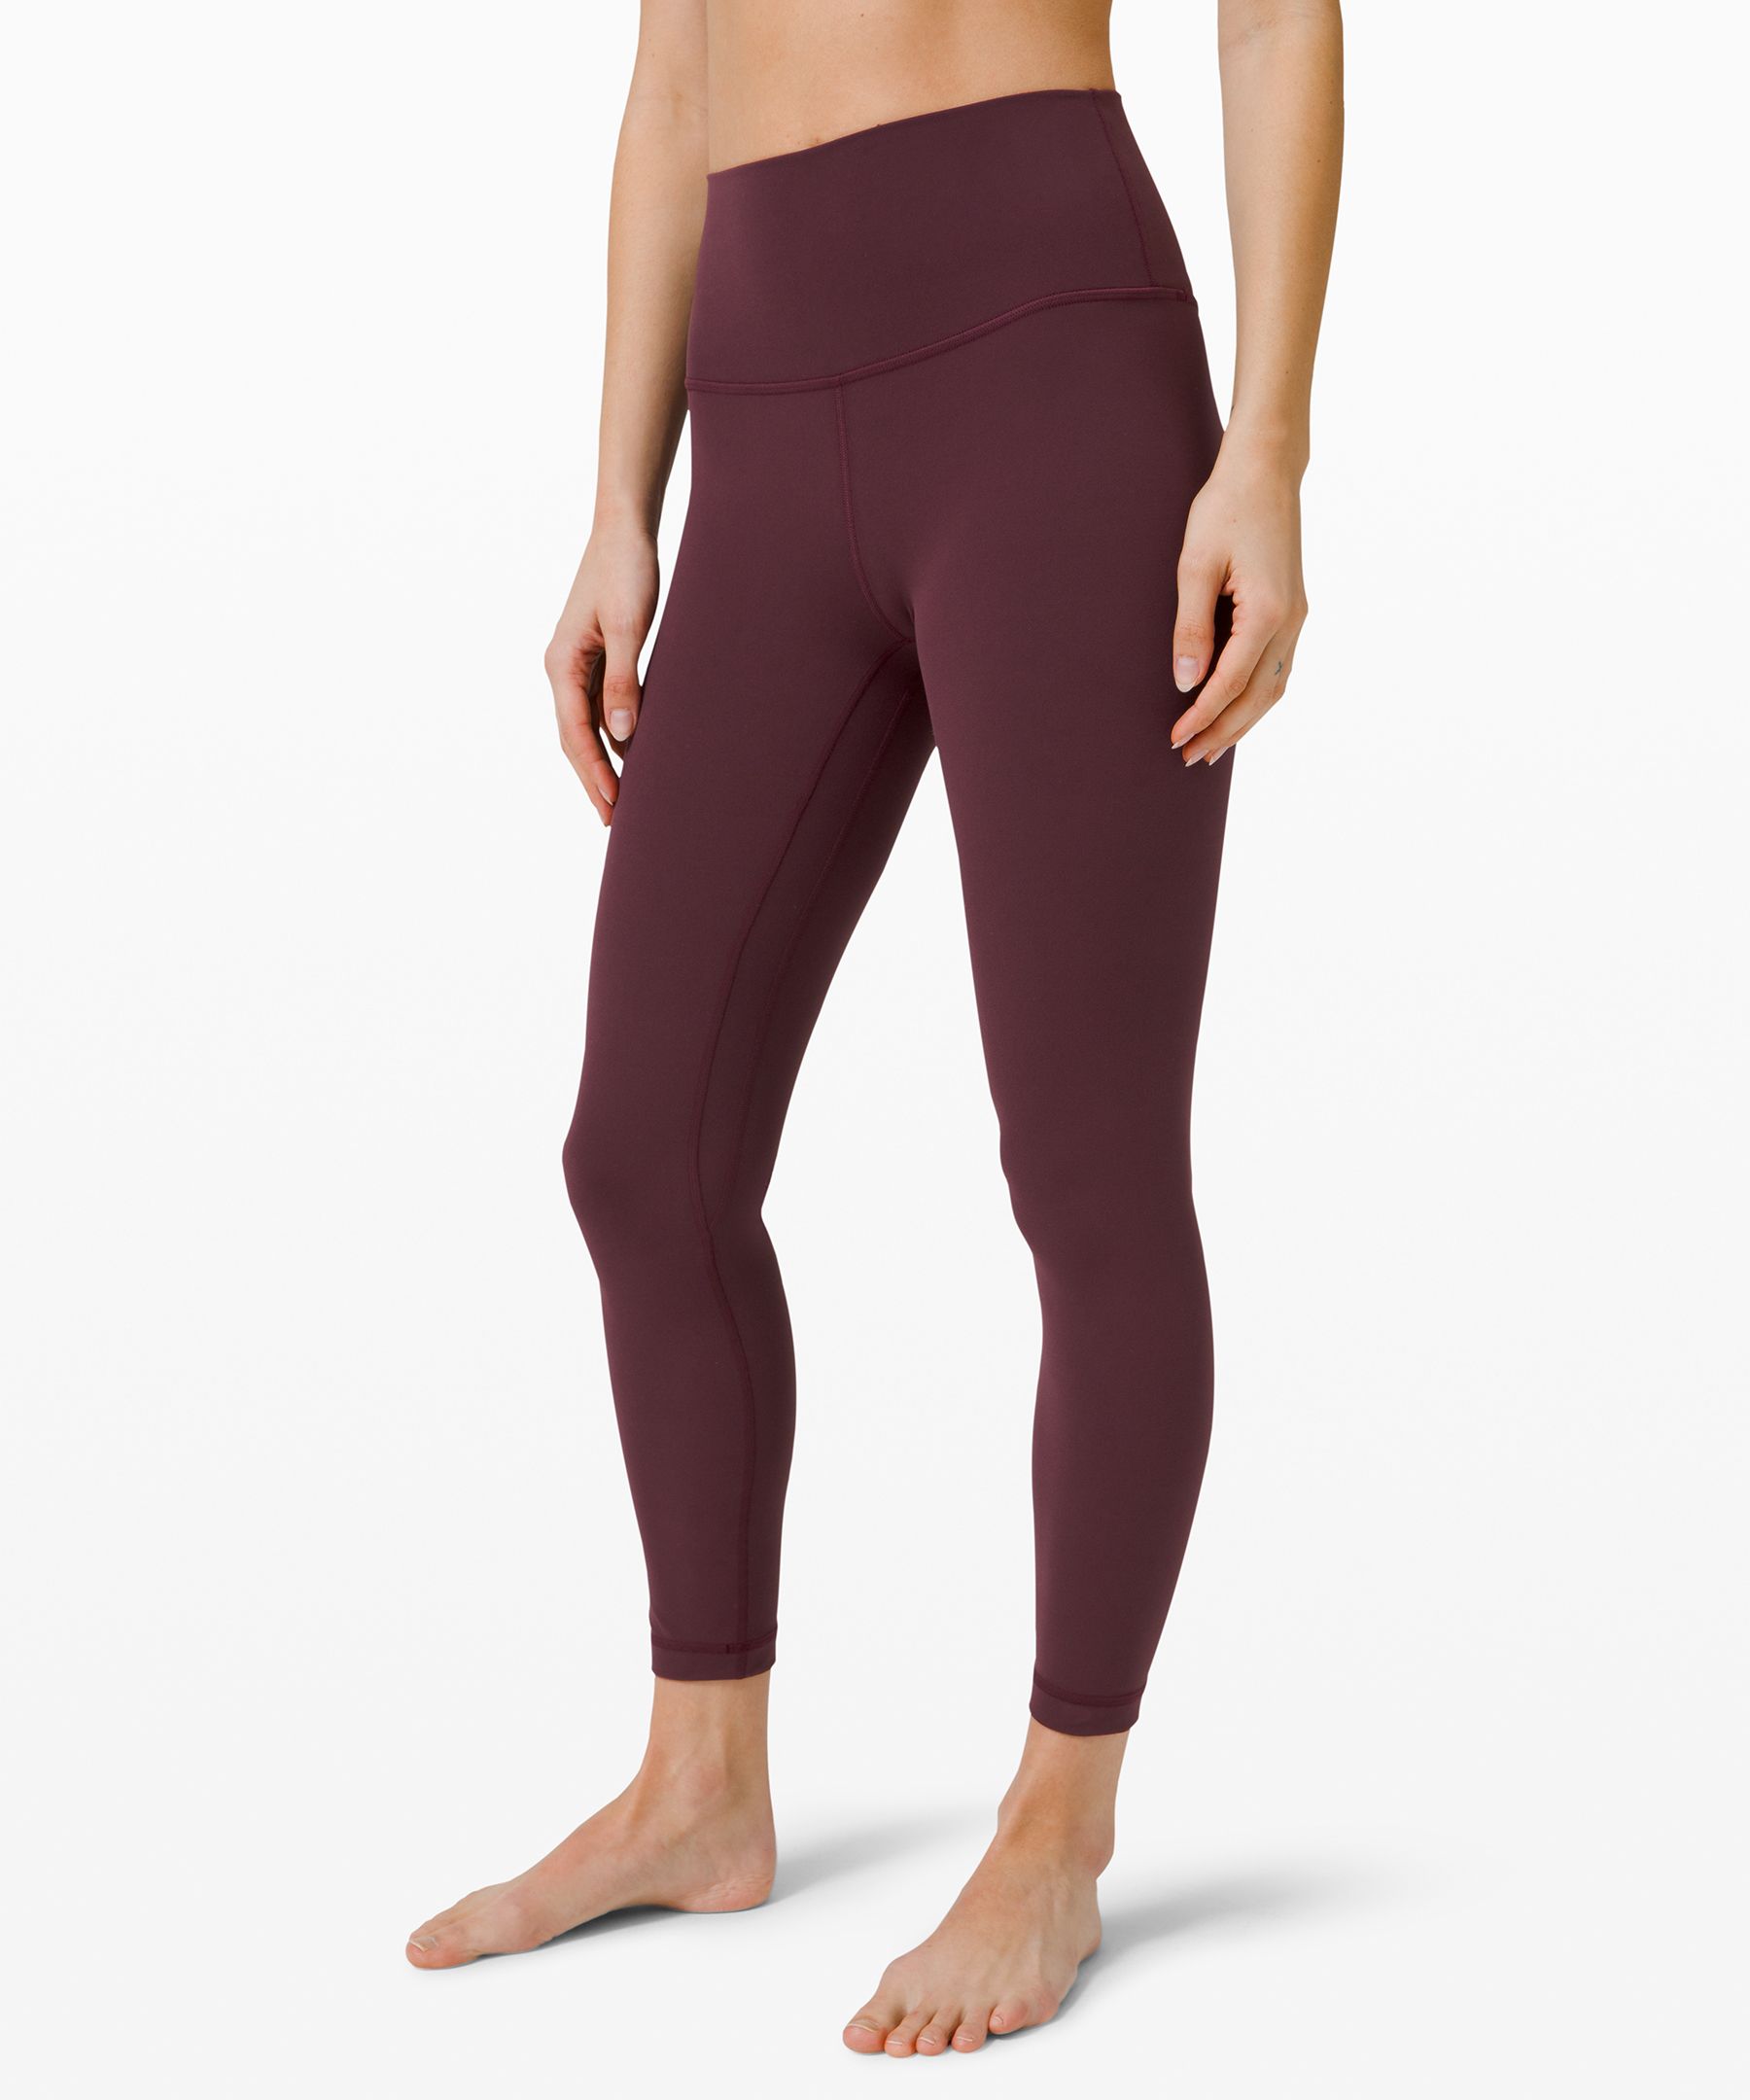 The lululemon Align™ Collection 